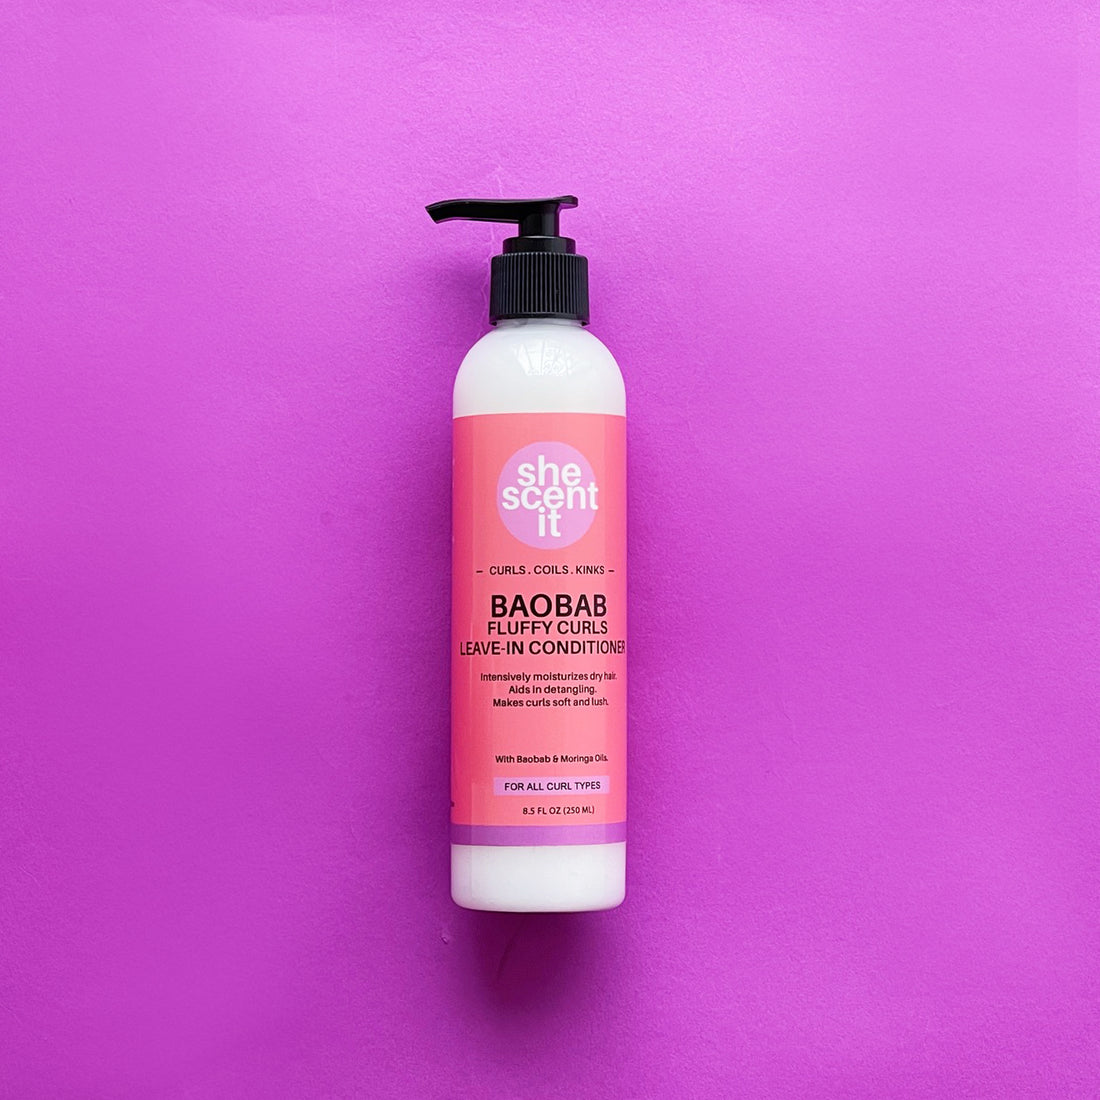 Baobab Fluffy Curls Leave-In Conditioner